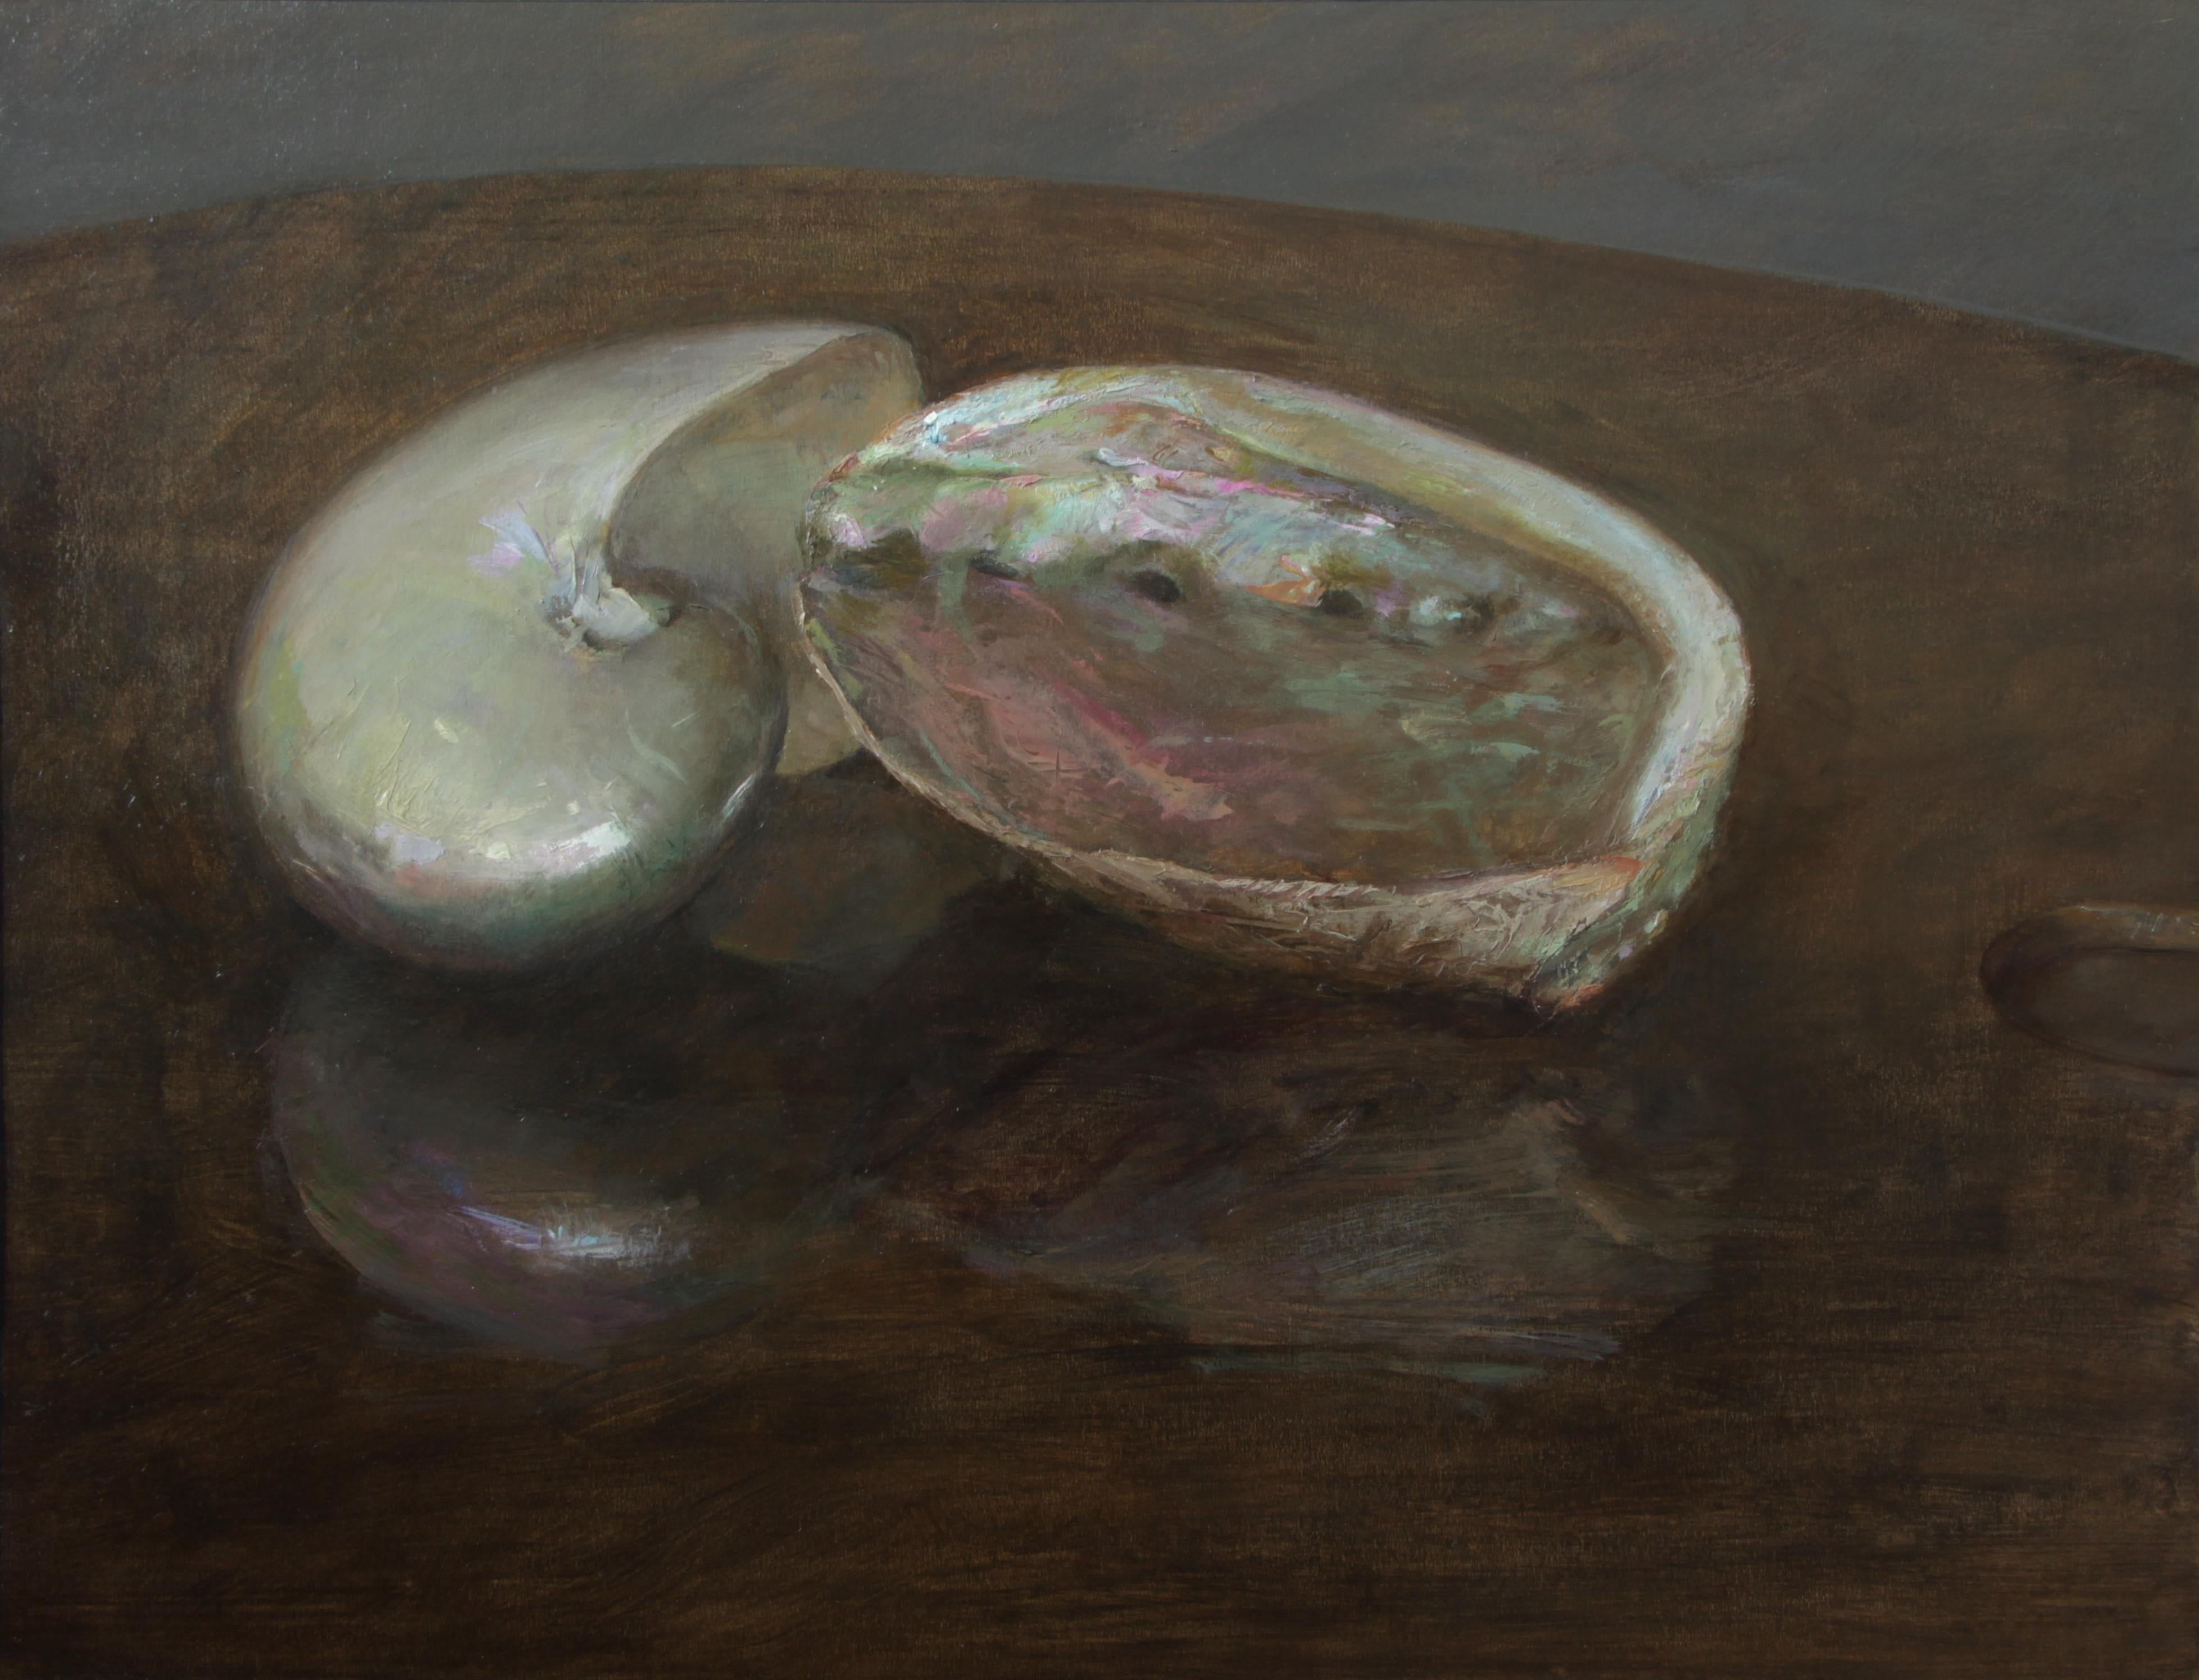 Helen Oh Animal Painting - Nautilus and Abalone, Sea Shells Still Life, Original Oil Painting on Panel